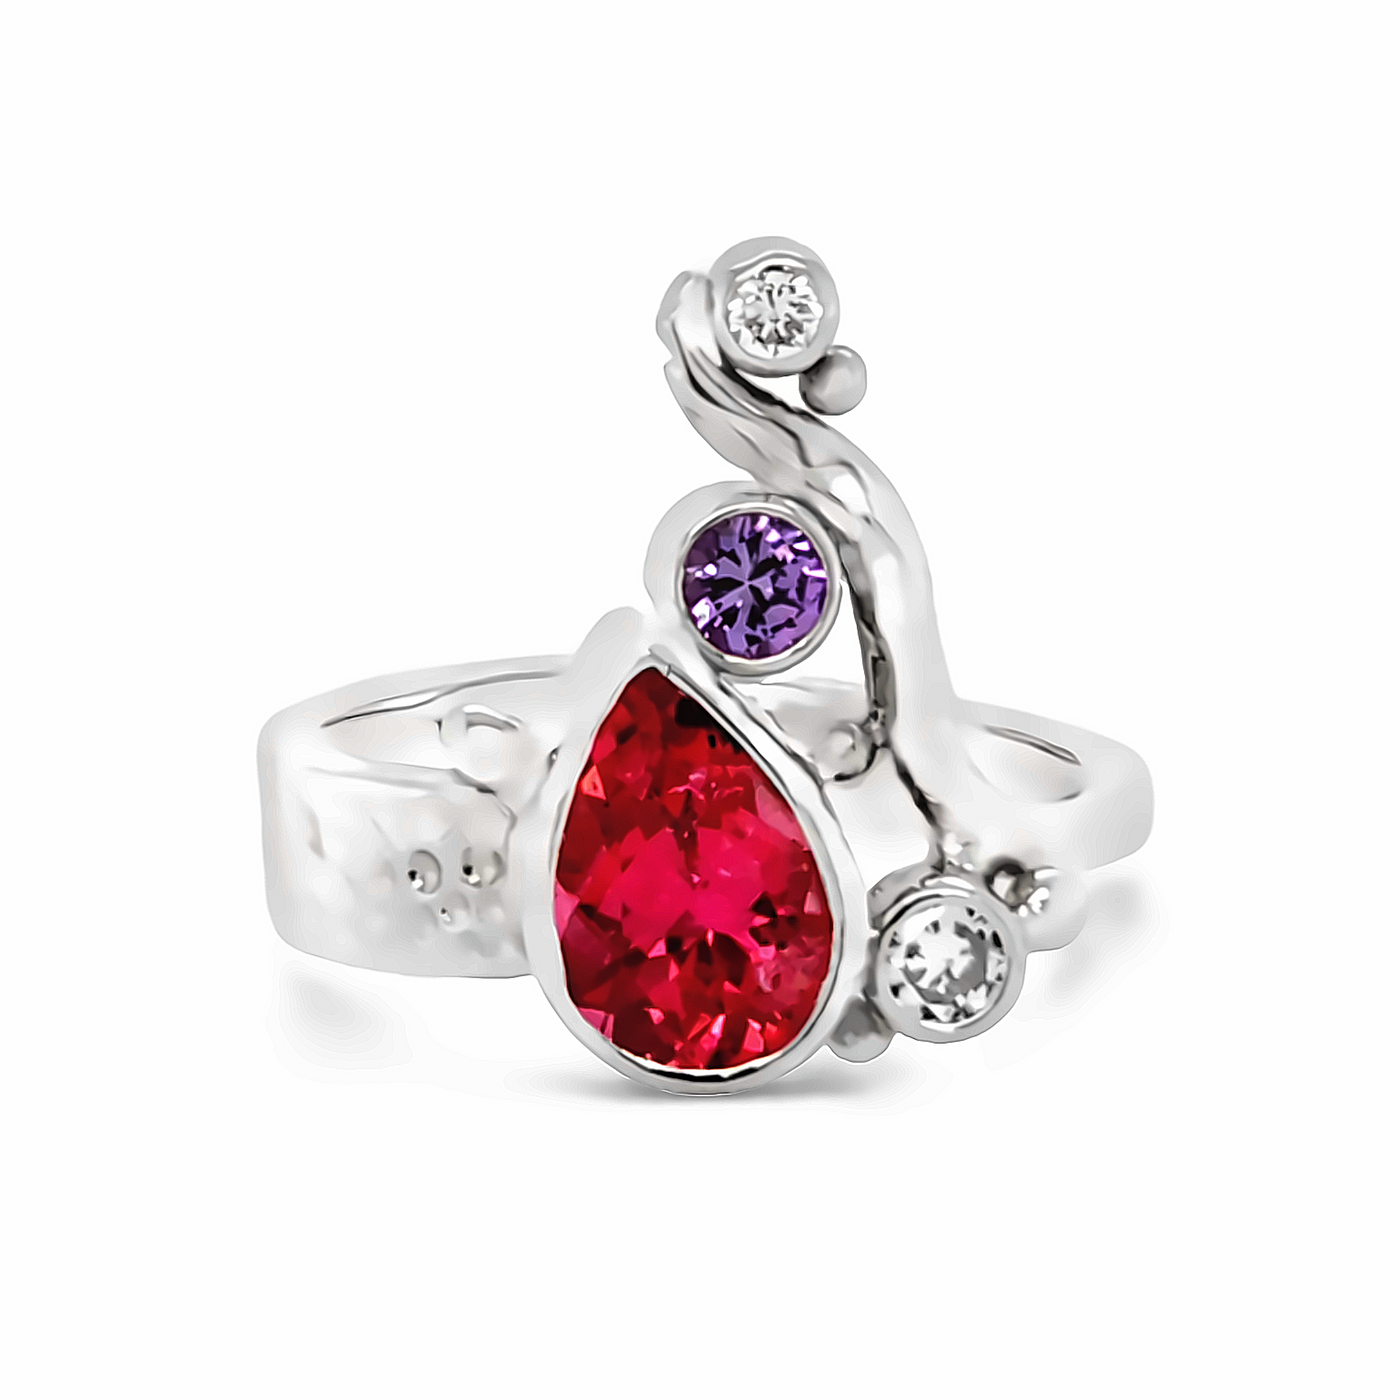 14k White Gold Pear Shape Pink Tourmaline Willow Ring by Paul Richter (1.93ct.)